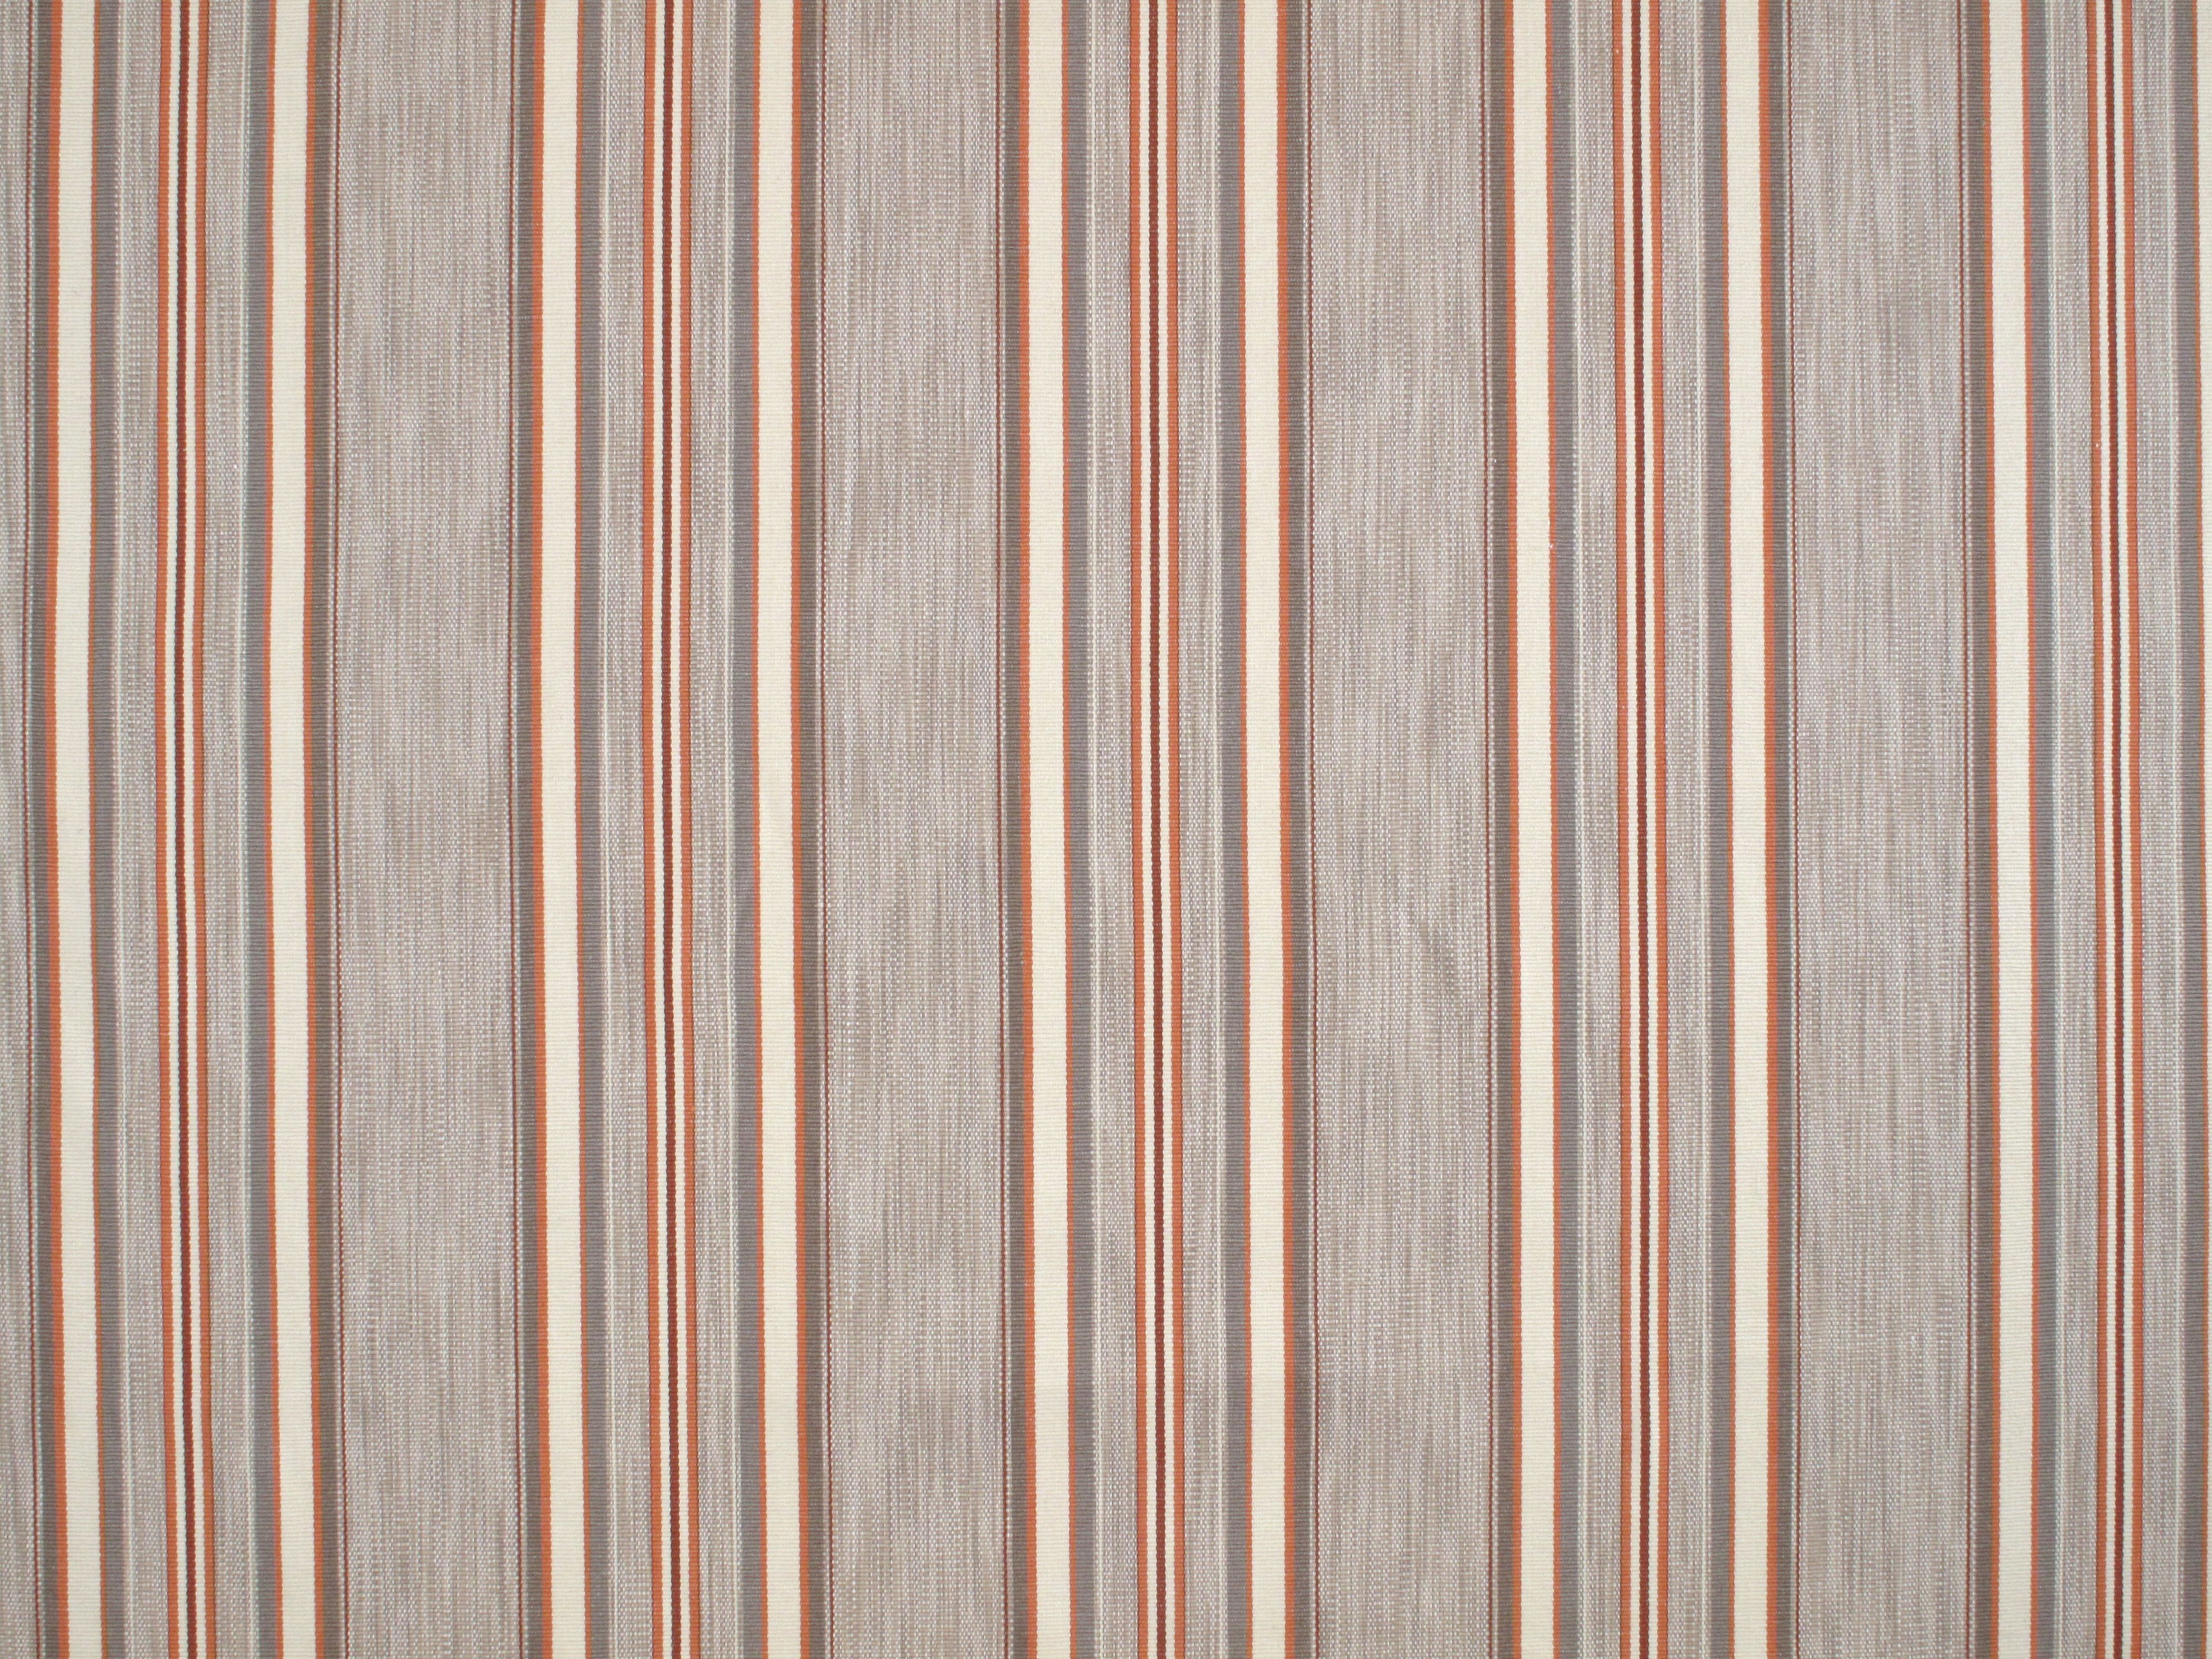 Bandos fabric in sand bar color - pattern number PQ 0003A168 - by Scalamandre in the Old World Weavers collection